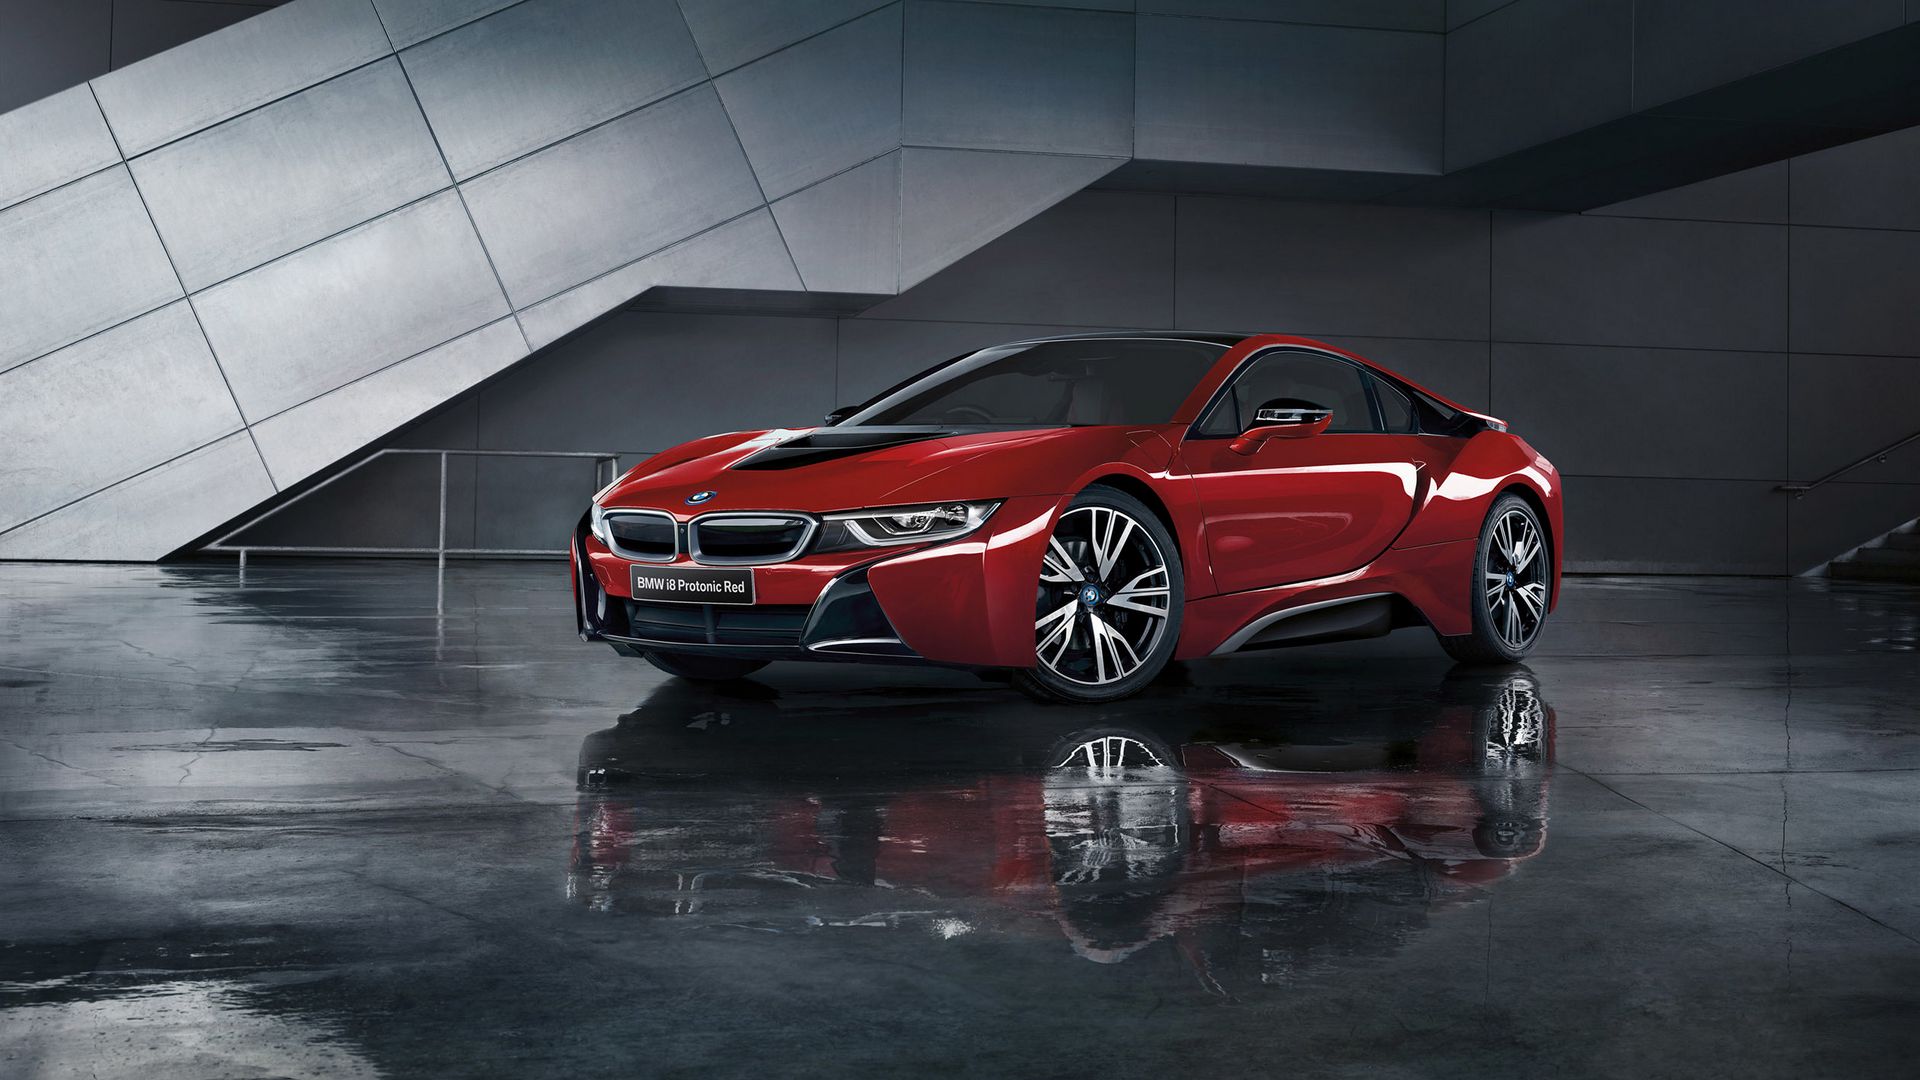 Download wallpaper 1920x1080 bmw, i8, i12, red, side view full hd, hdtv,  fhd, 1080p hd background